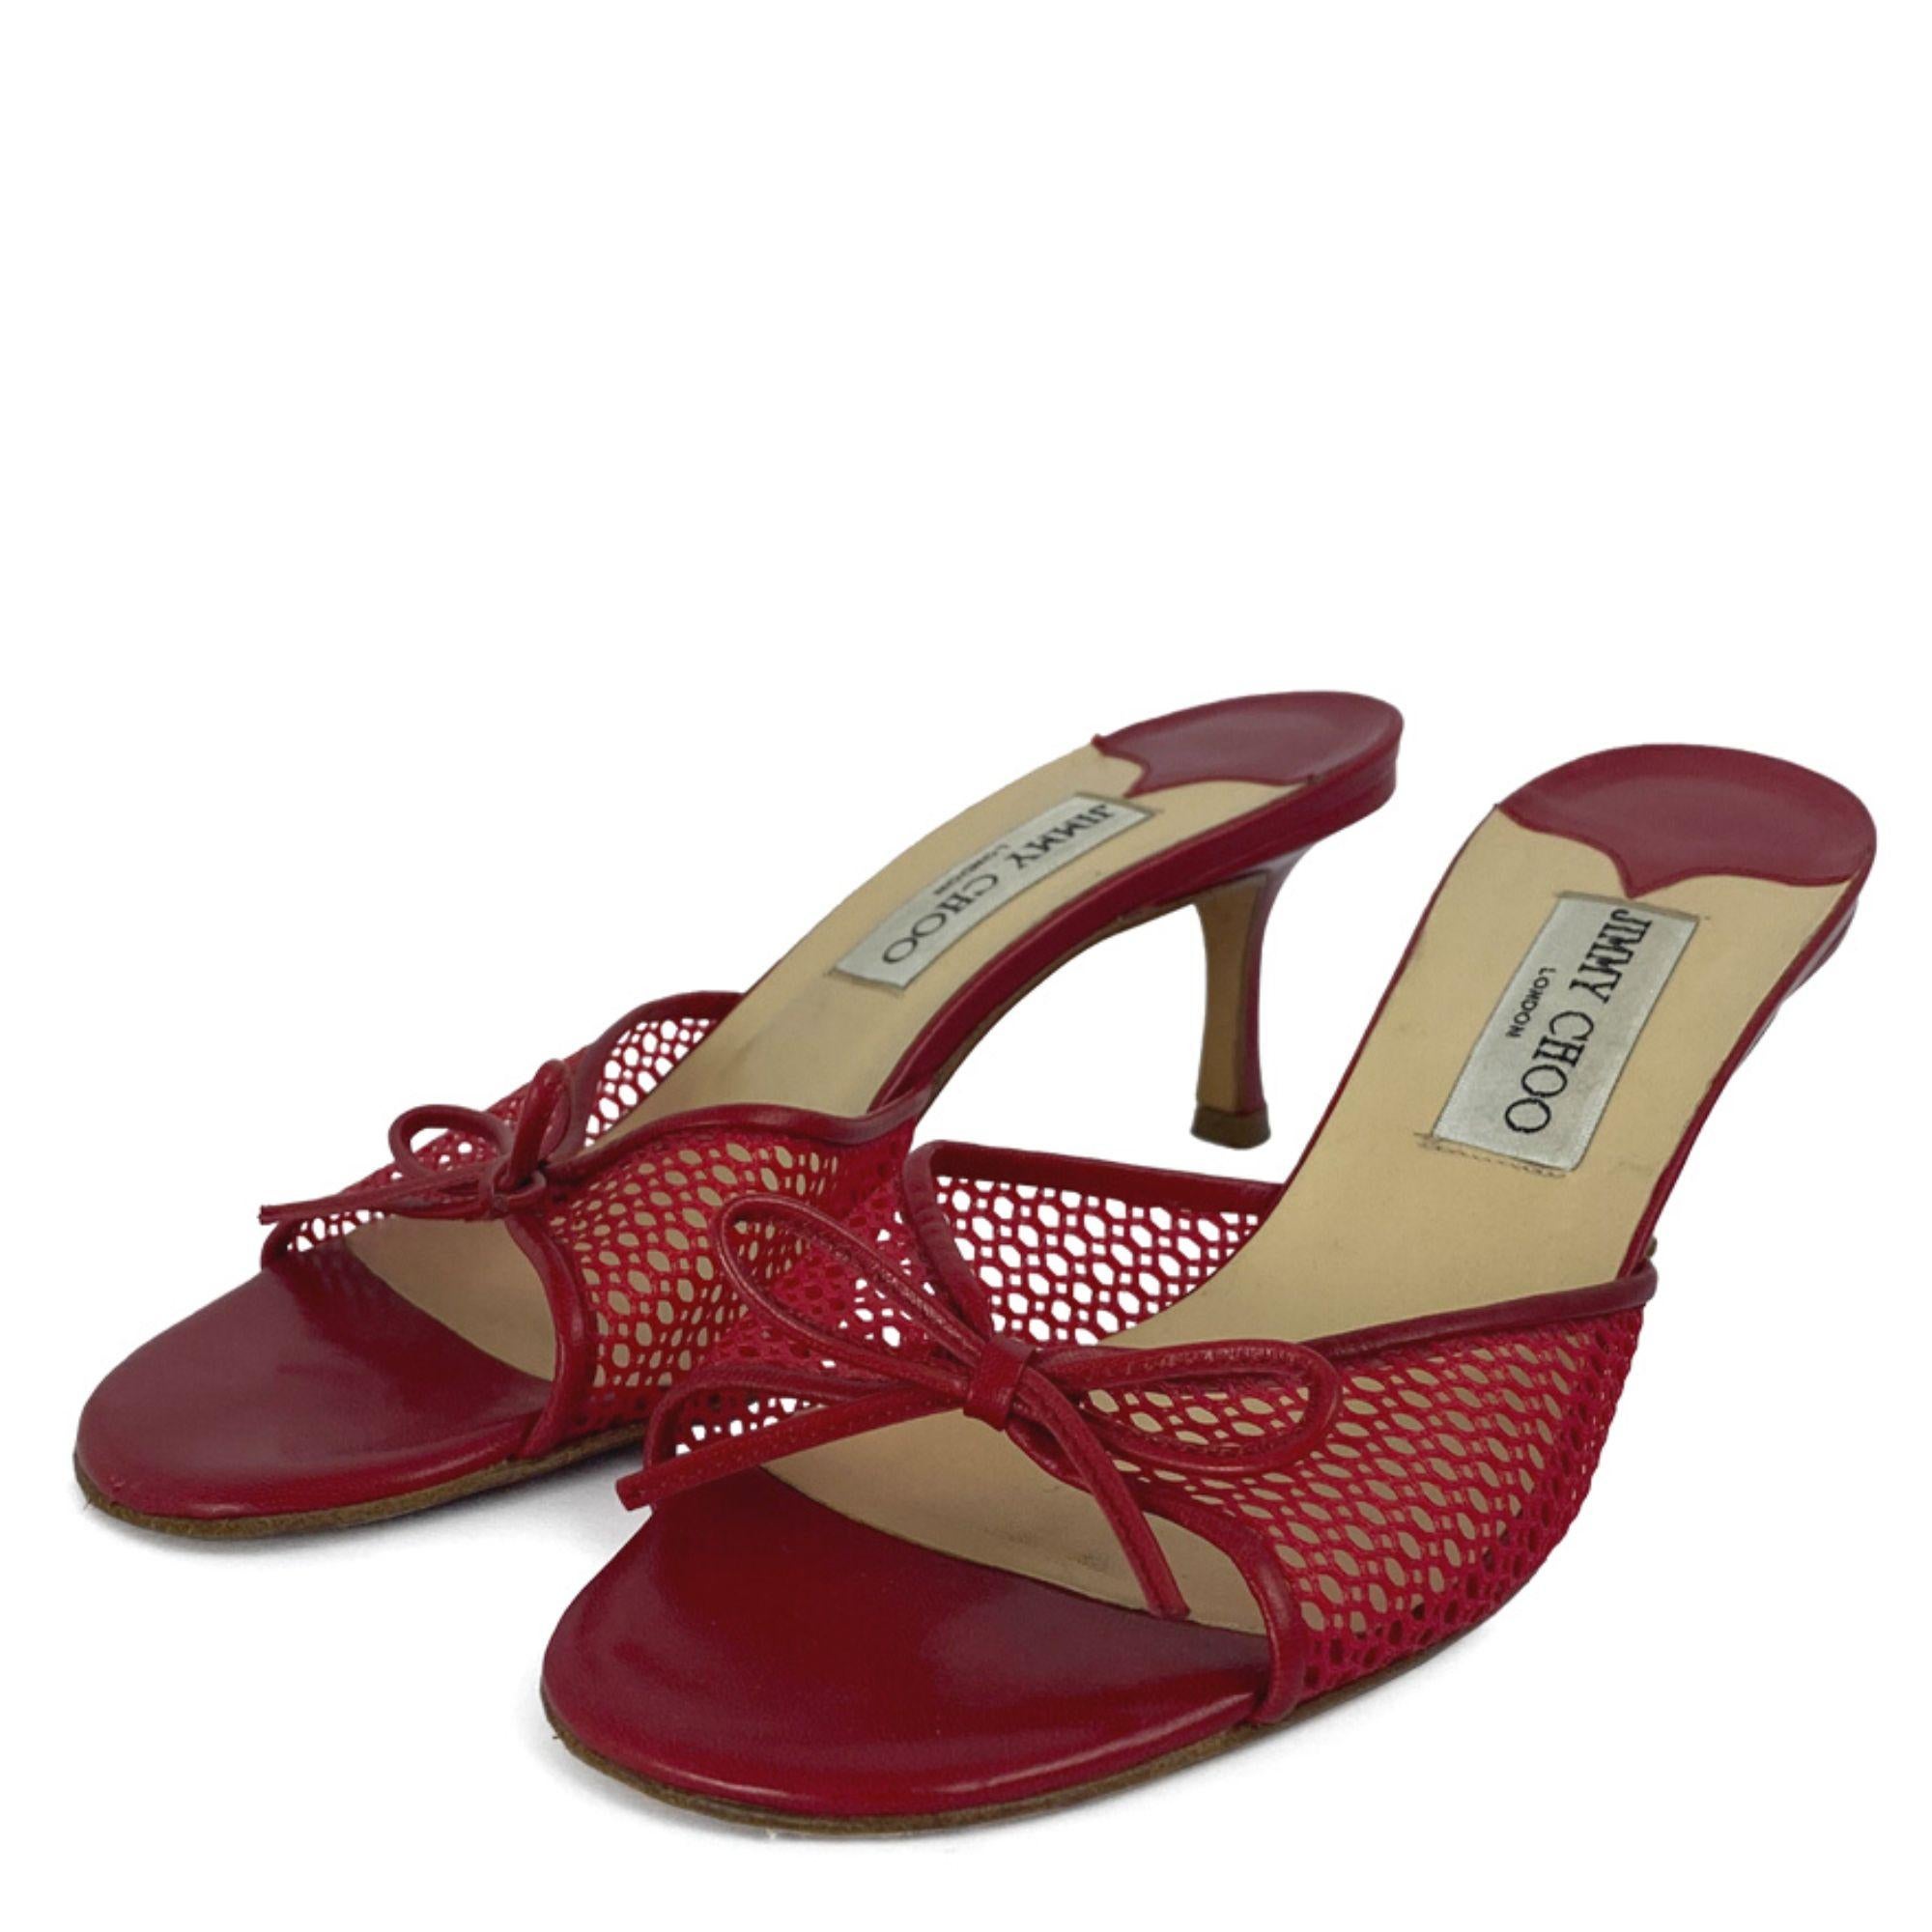 Jimmy Choo red leather mesh slip on kitten heels. In excellent condition.

Material: Leather

Size: US 6.5

EU 37.5

Heel: 6cm

Condition

Overall Condition: excellent 

Interior Condition: excellent 

Exterior Condition: excellent 

Extras

N/A